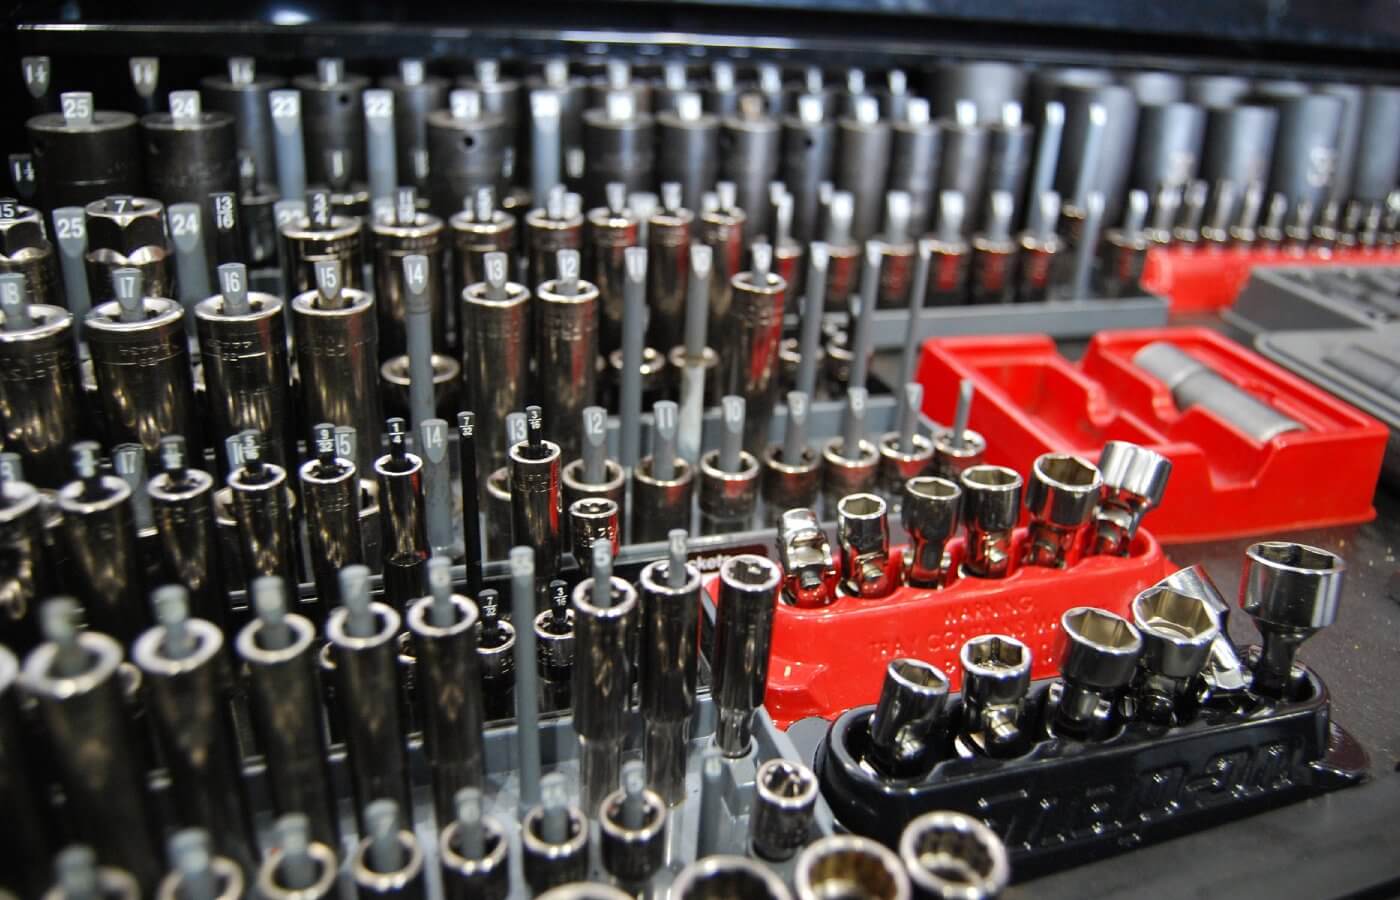 Direct4x4 expert mechanic fitting service page using a close-up photo of many different wrench sockets and other tools